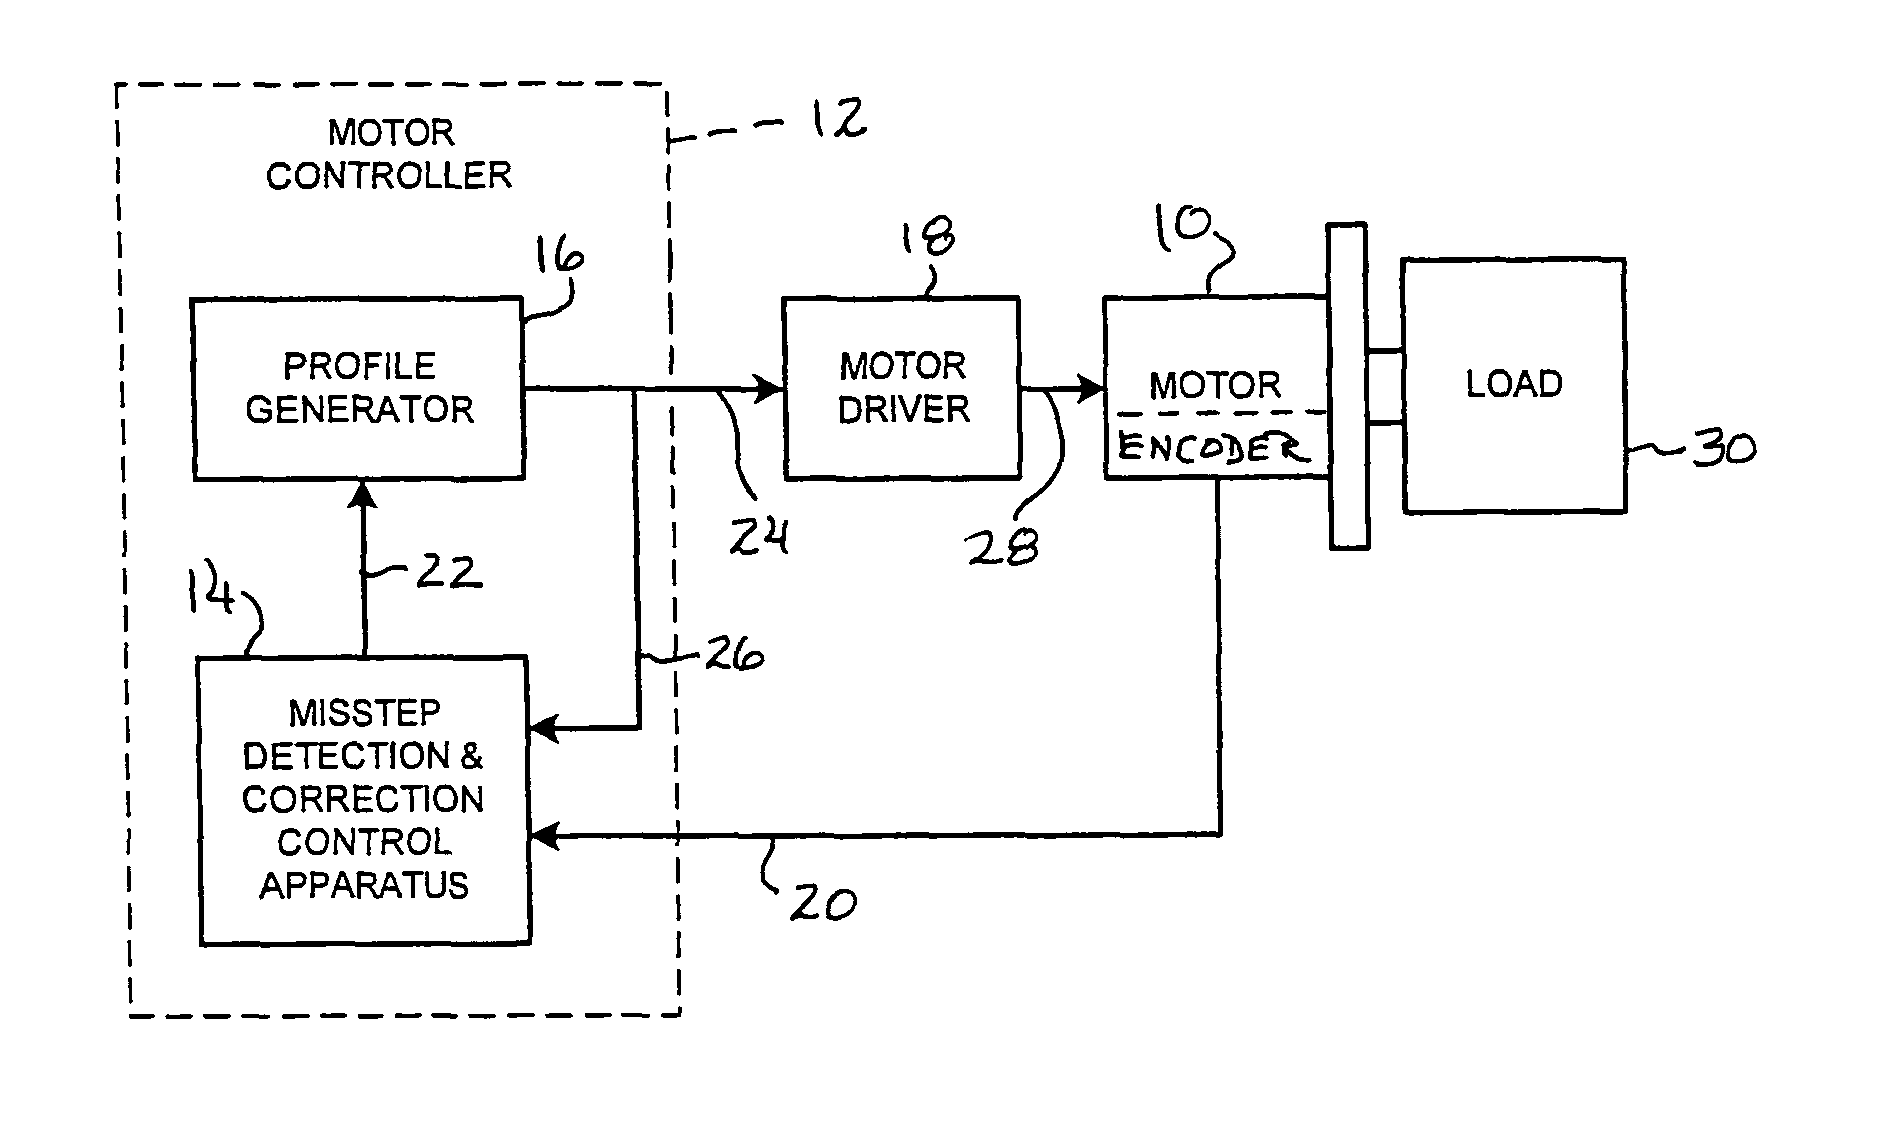 Method and apparatus for misstep detection and recovery in a stepper motor